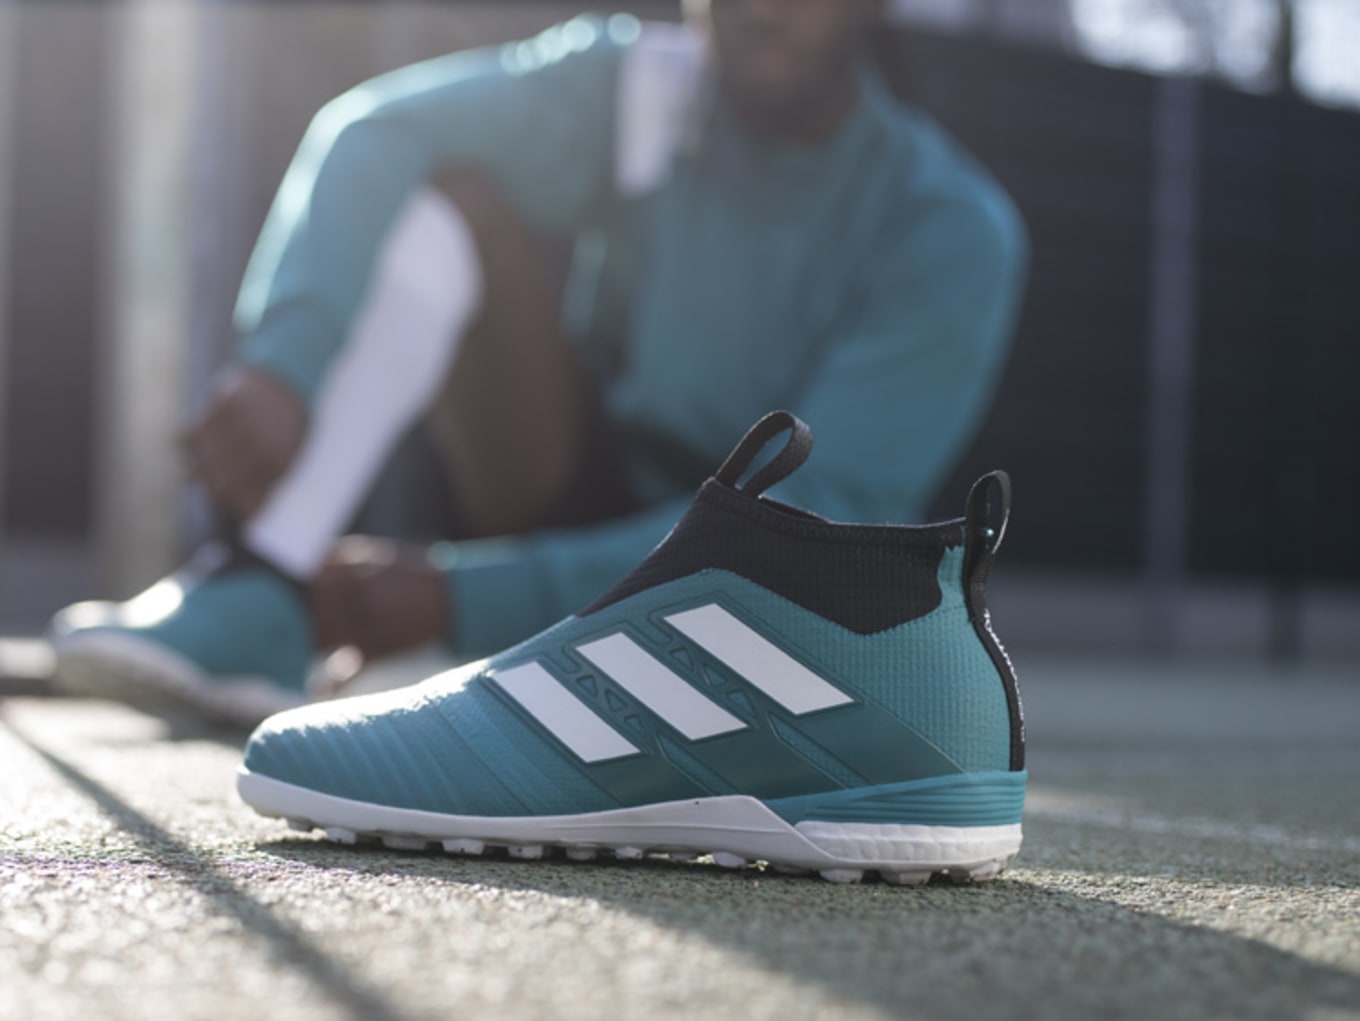 adidas soccer lifestyle shoes